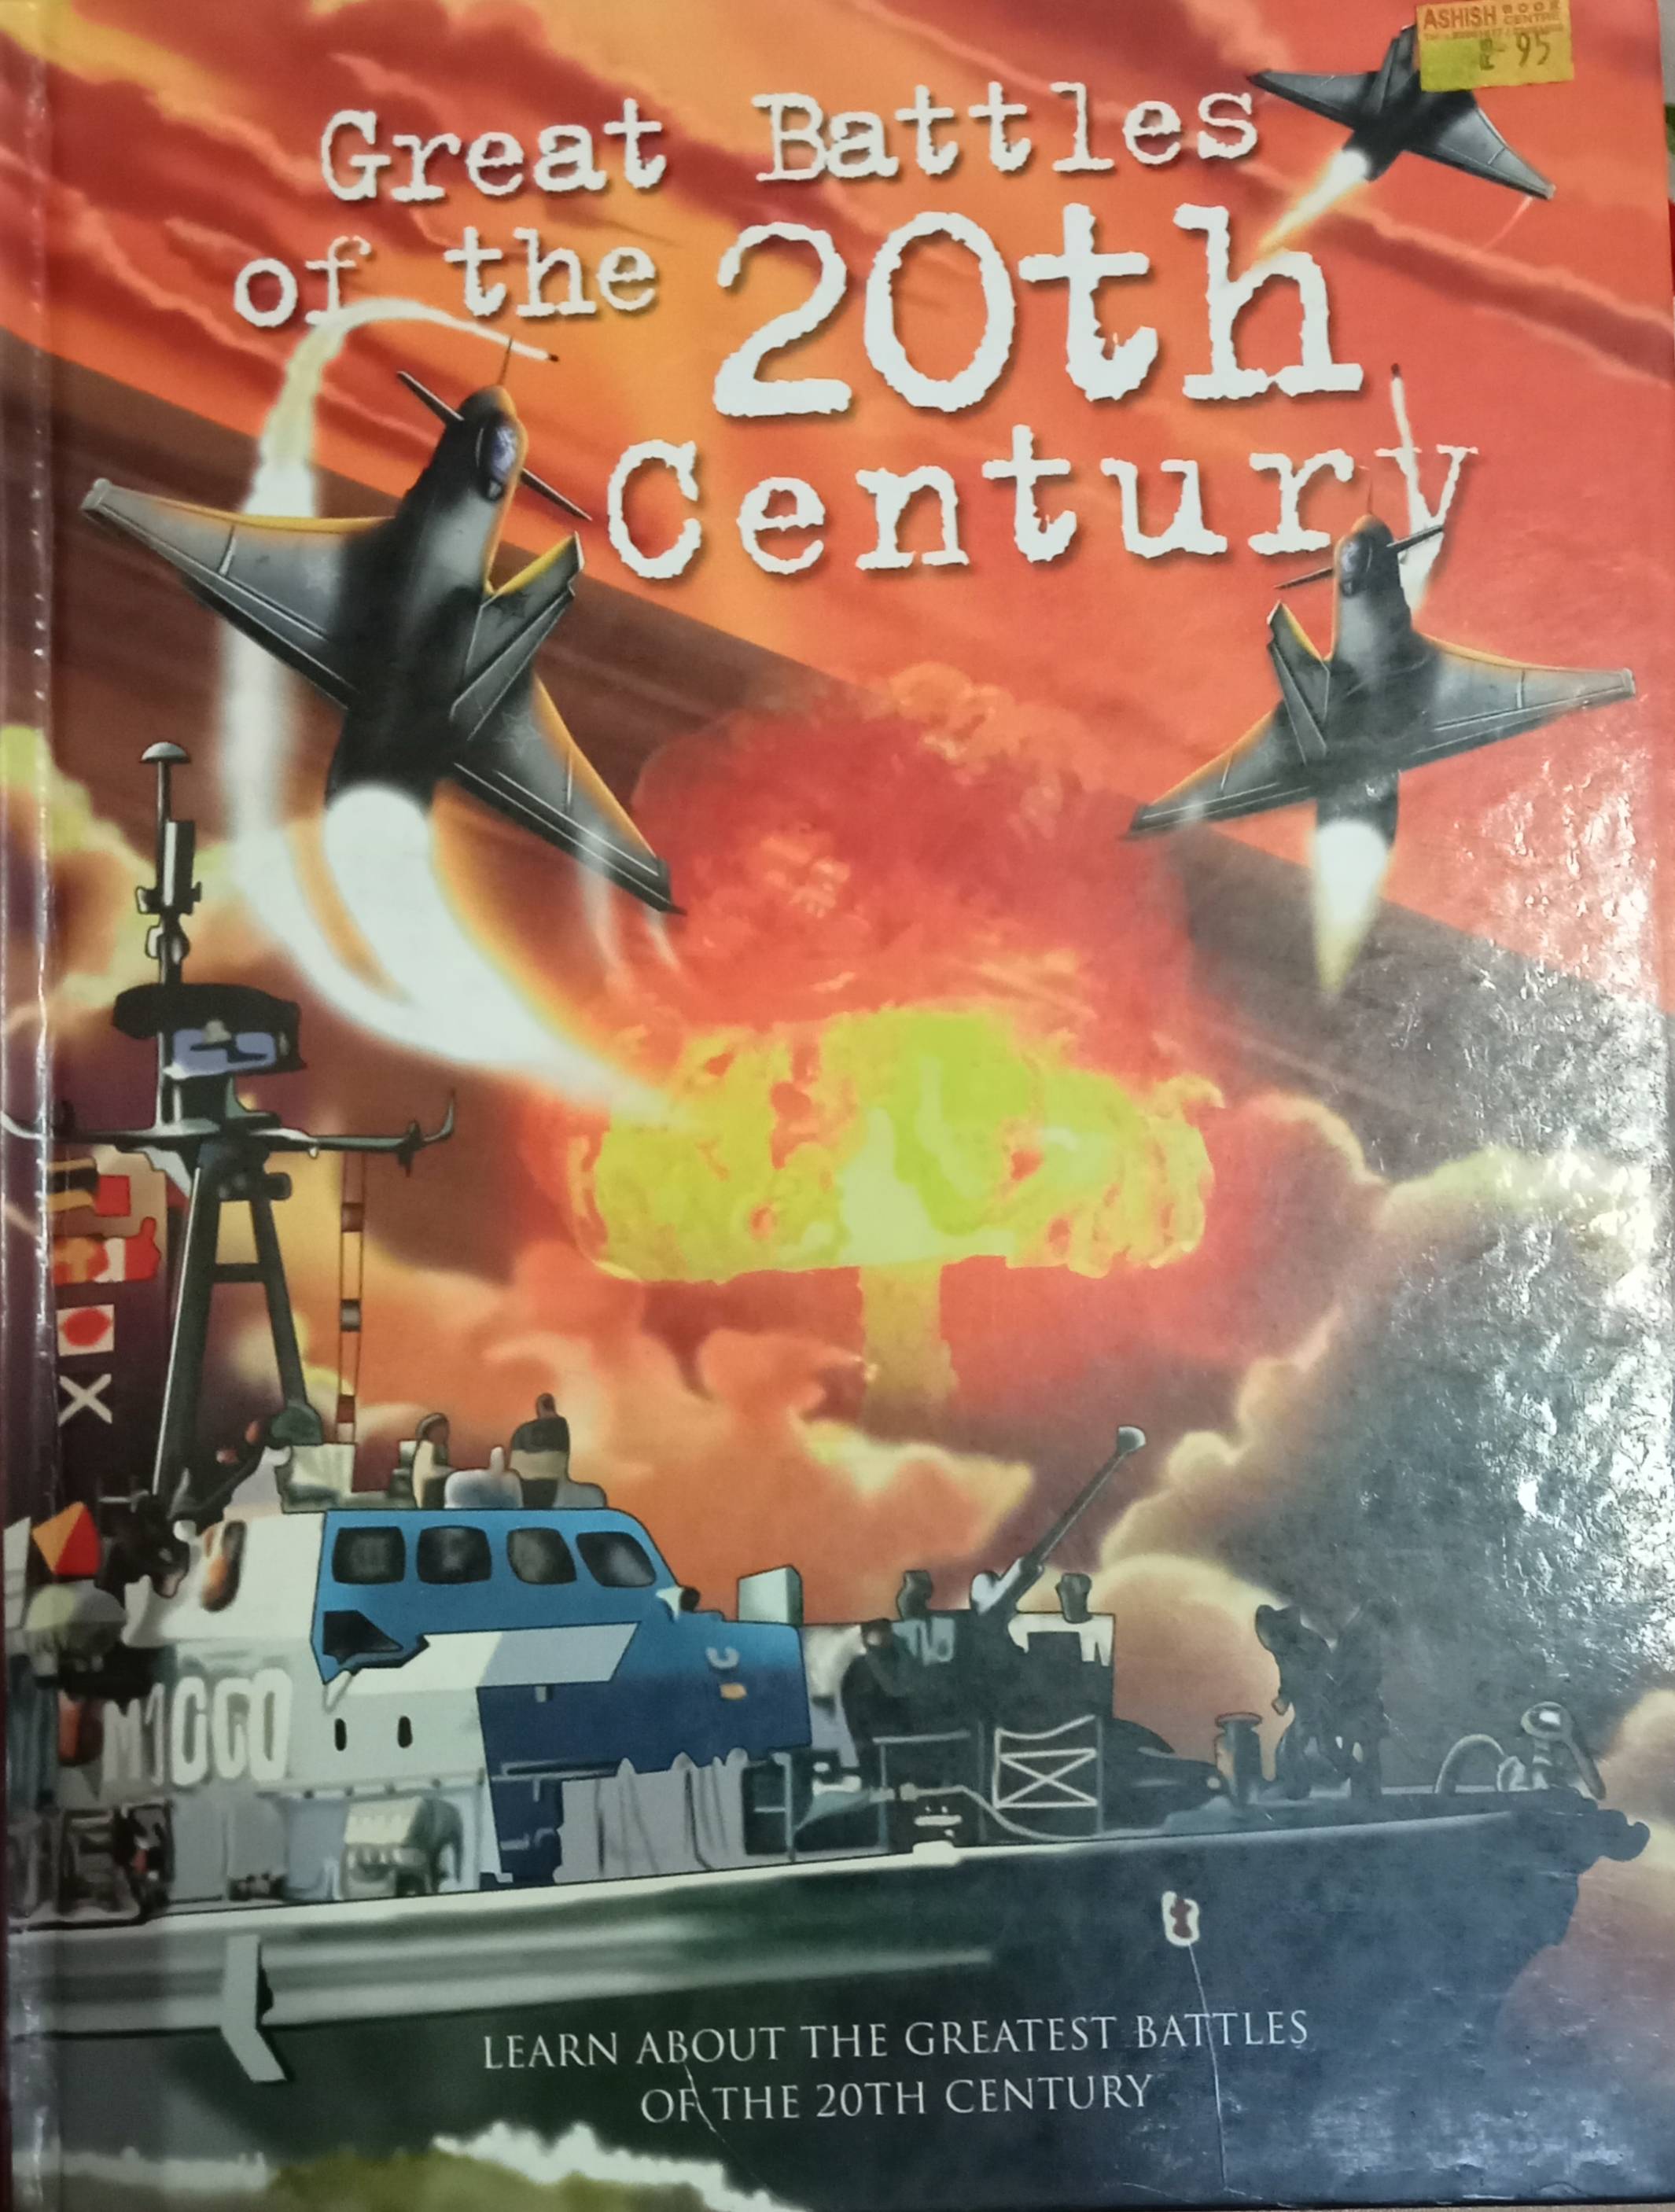 IMG : Great battles of the 20th century